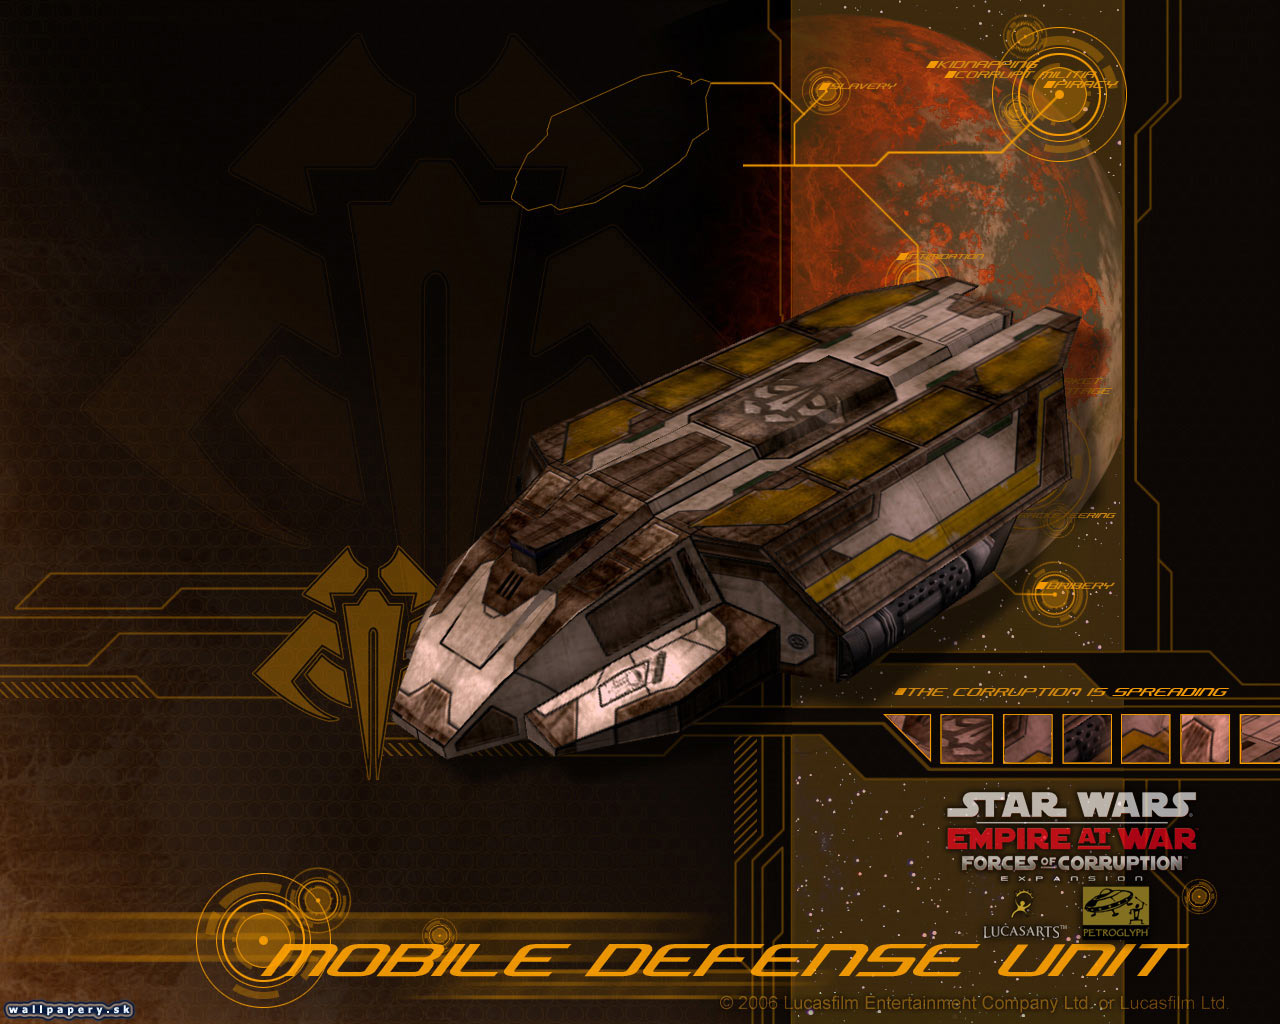 Star Wars: Empire At War - Forces of Corruption - wallpaper 9